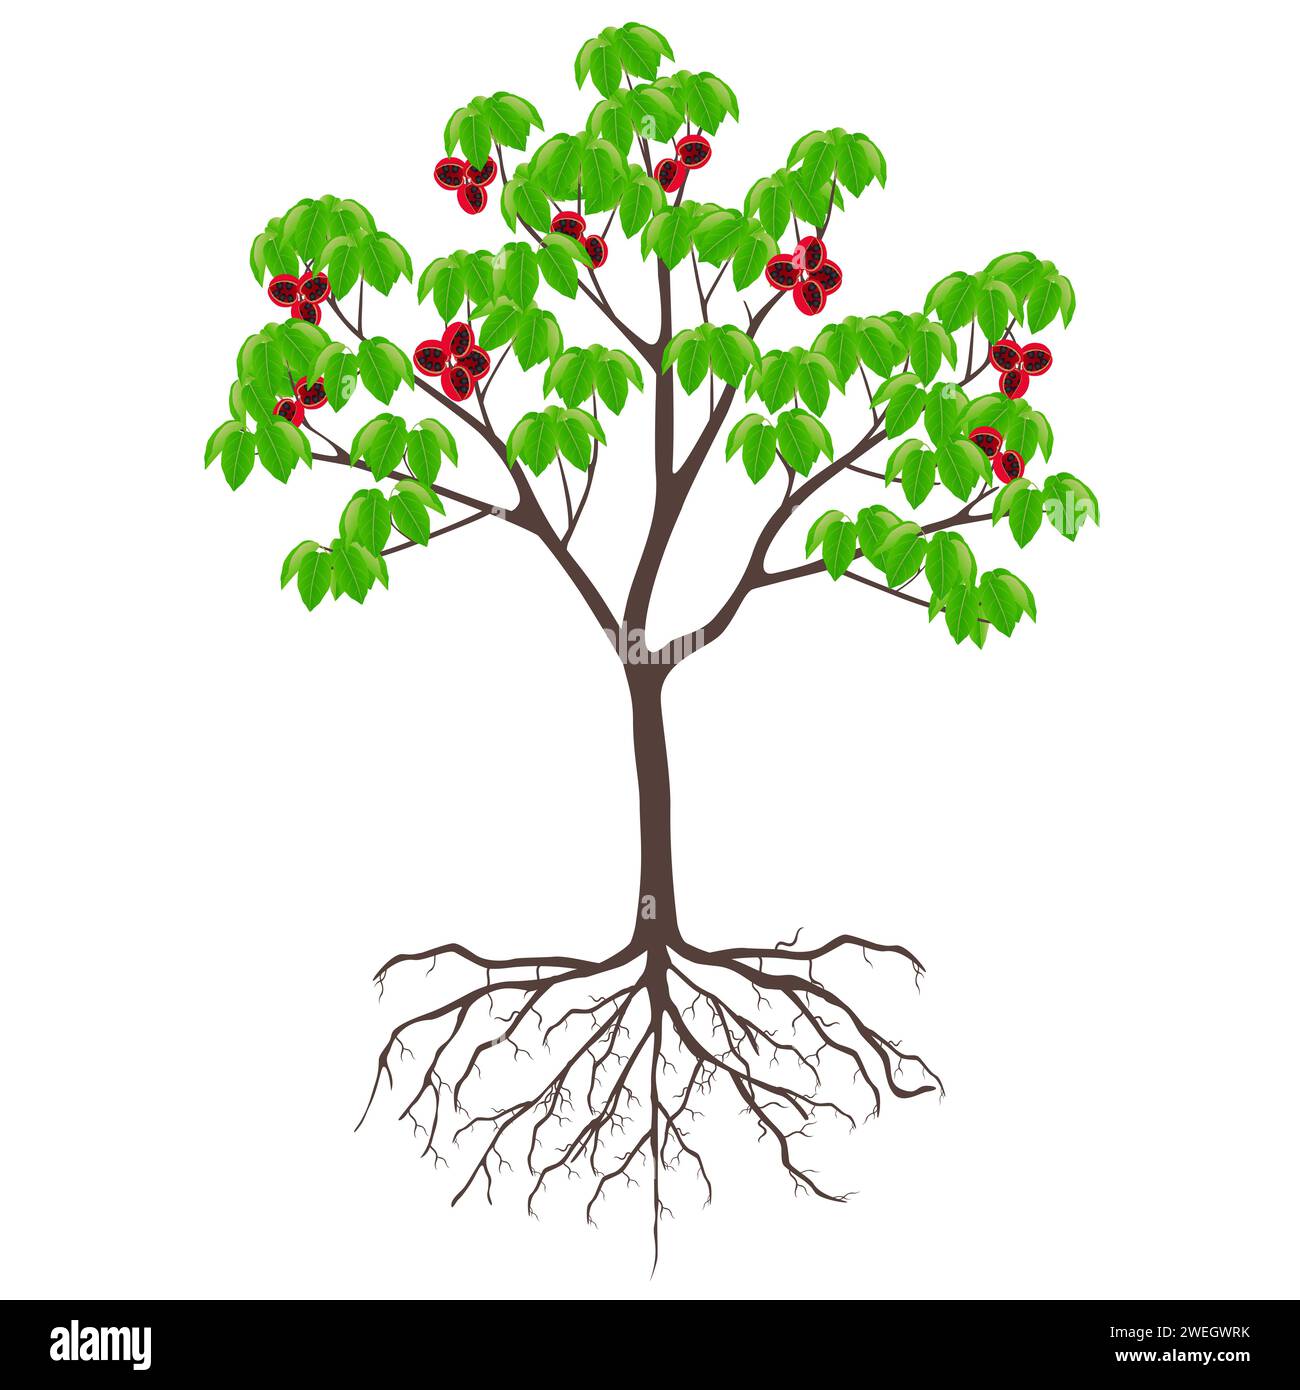 Sterculia quadrifida tree with fruits and roots on a white background. Stock Vector